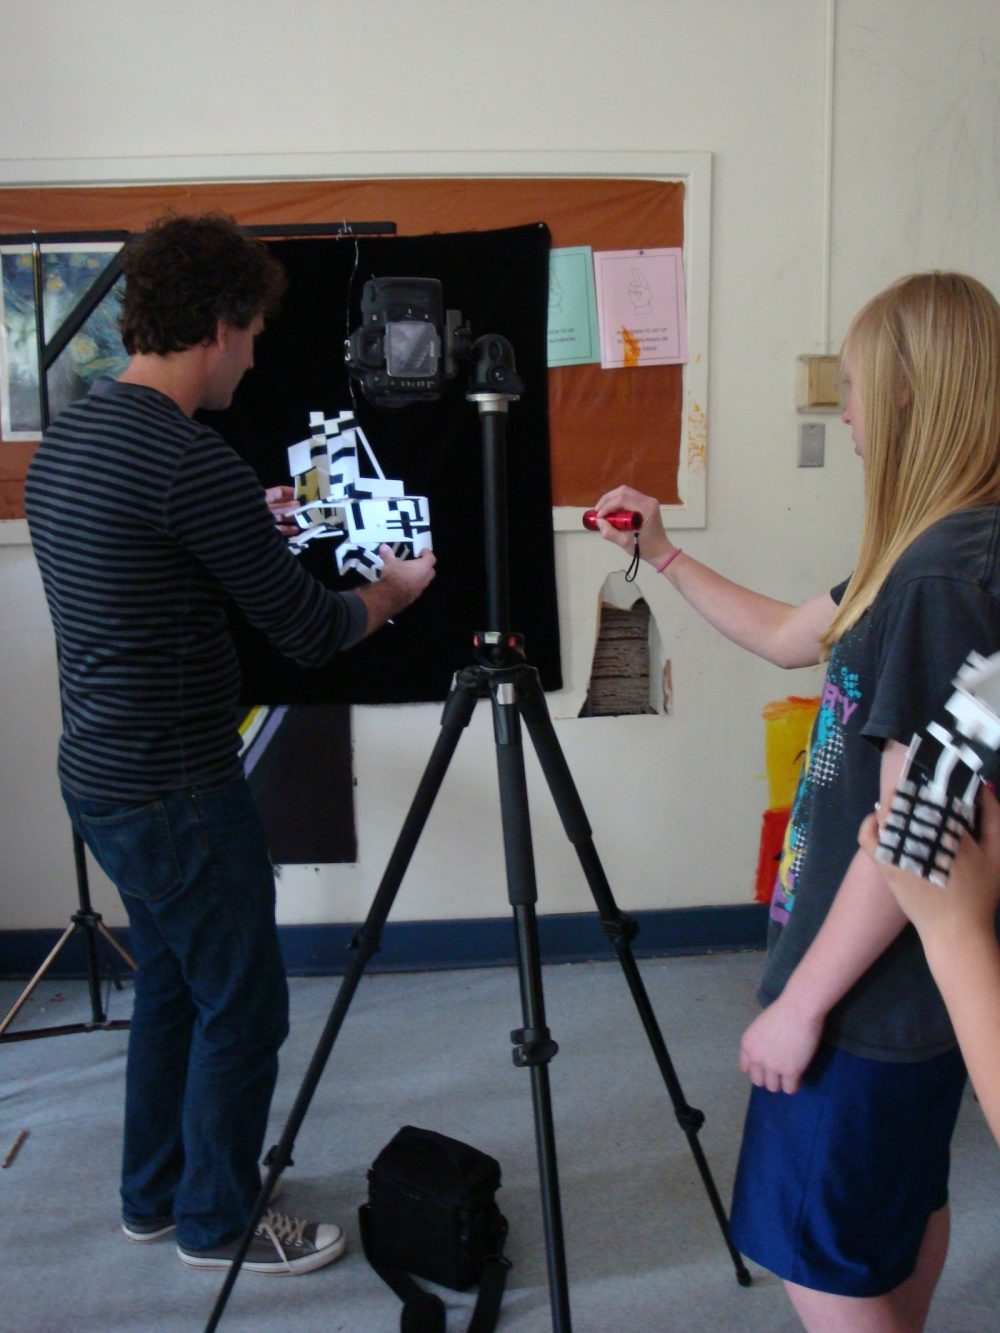 Ryan Suter holds a small satellite-like object against a black backdrop while a young person illuminates it with a flashlight. A camera on a tripod is positioned between the two people.